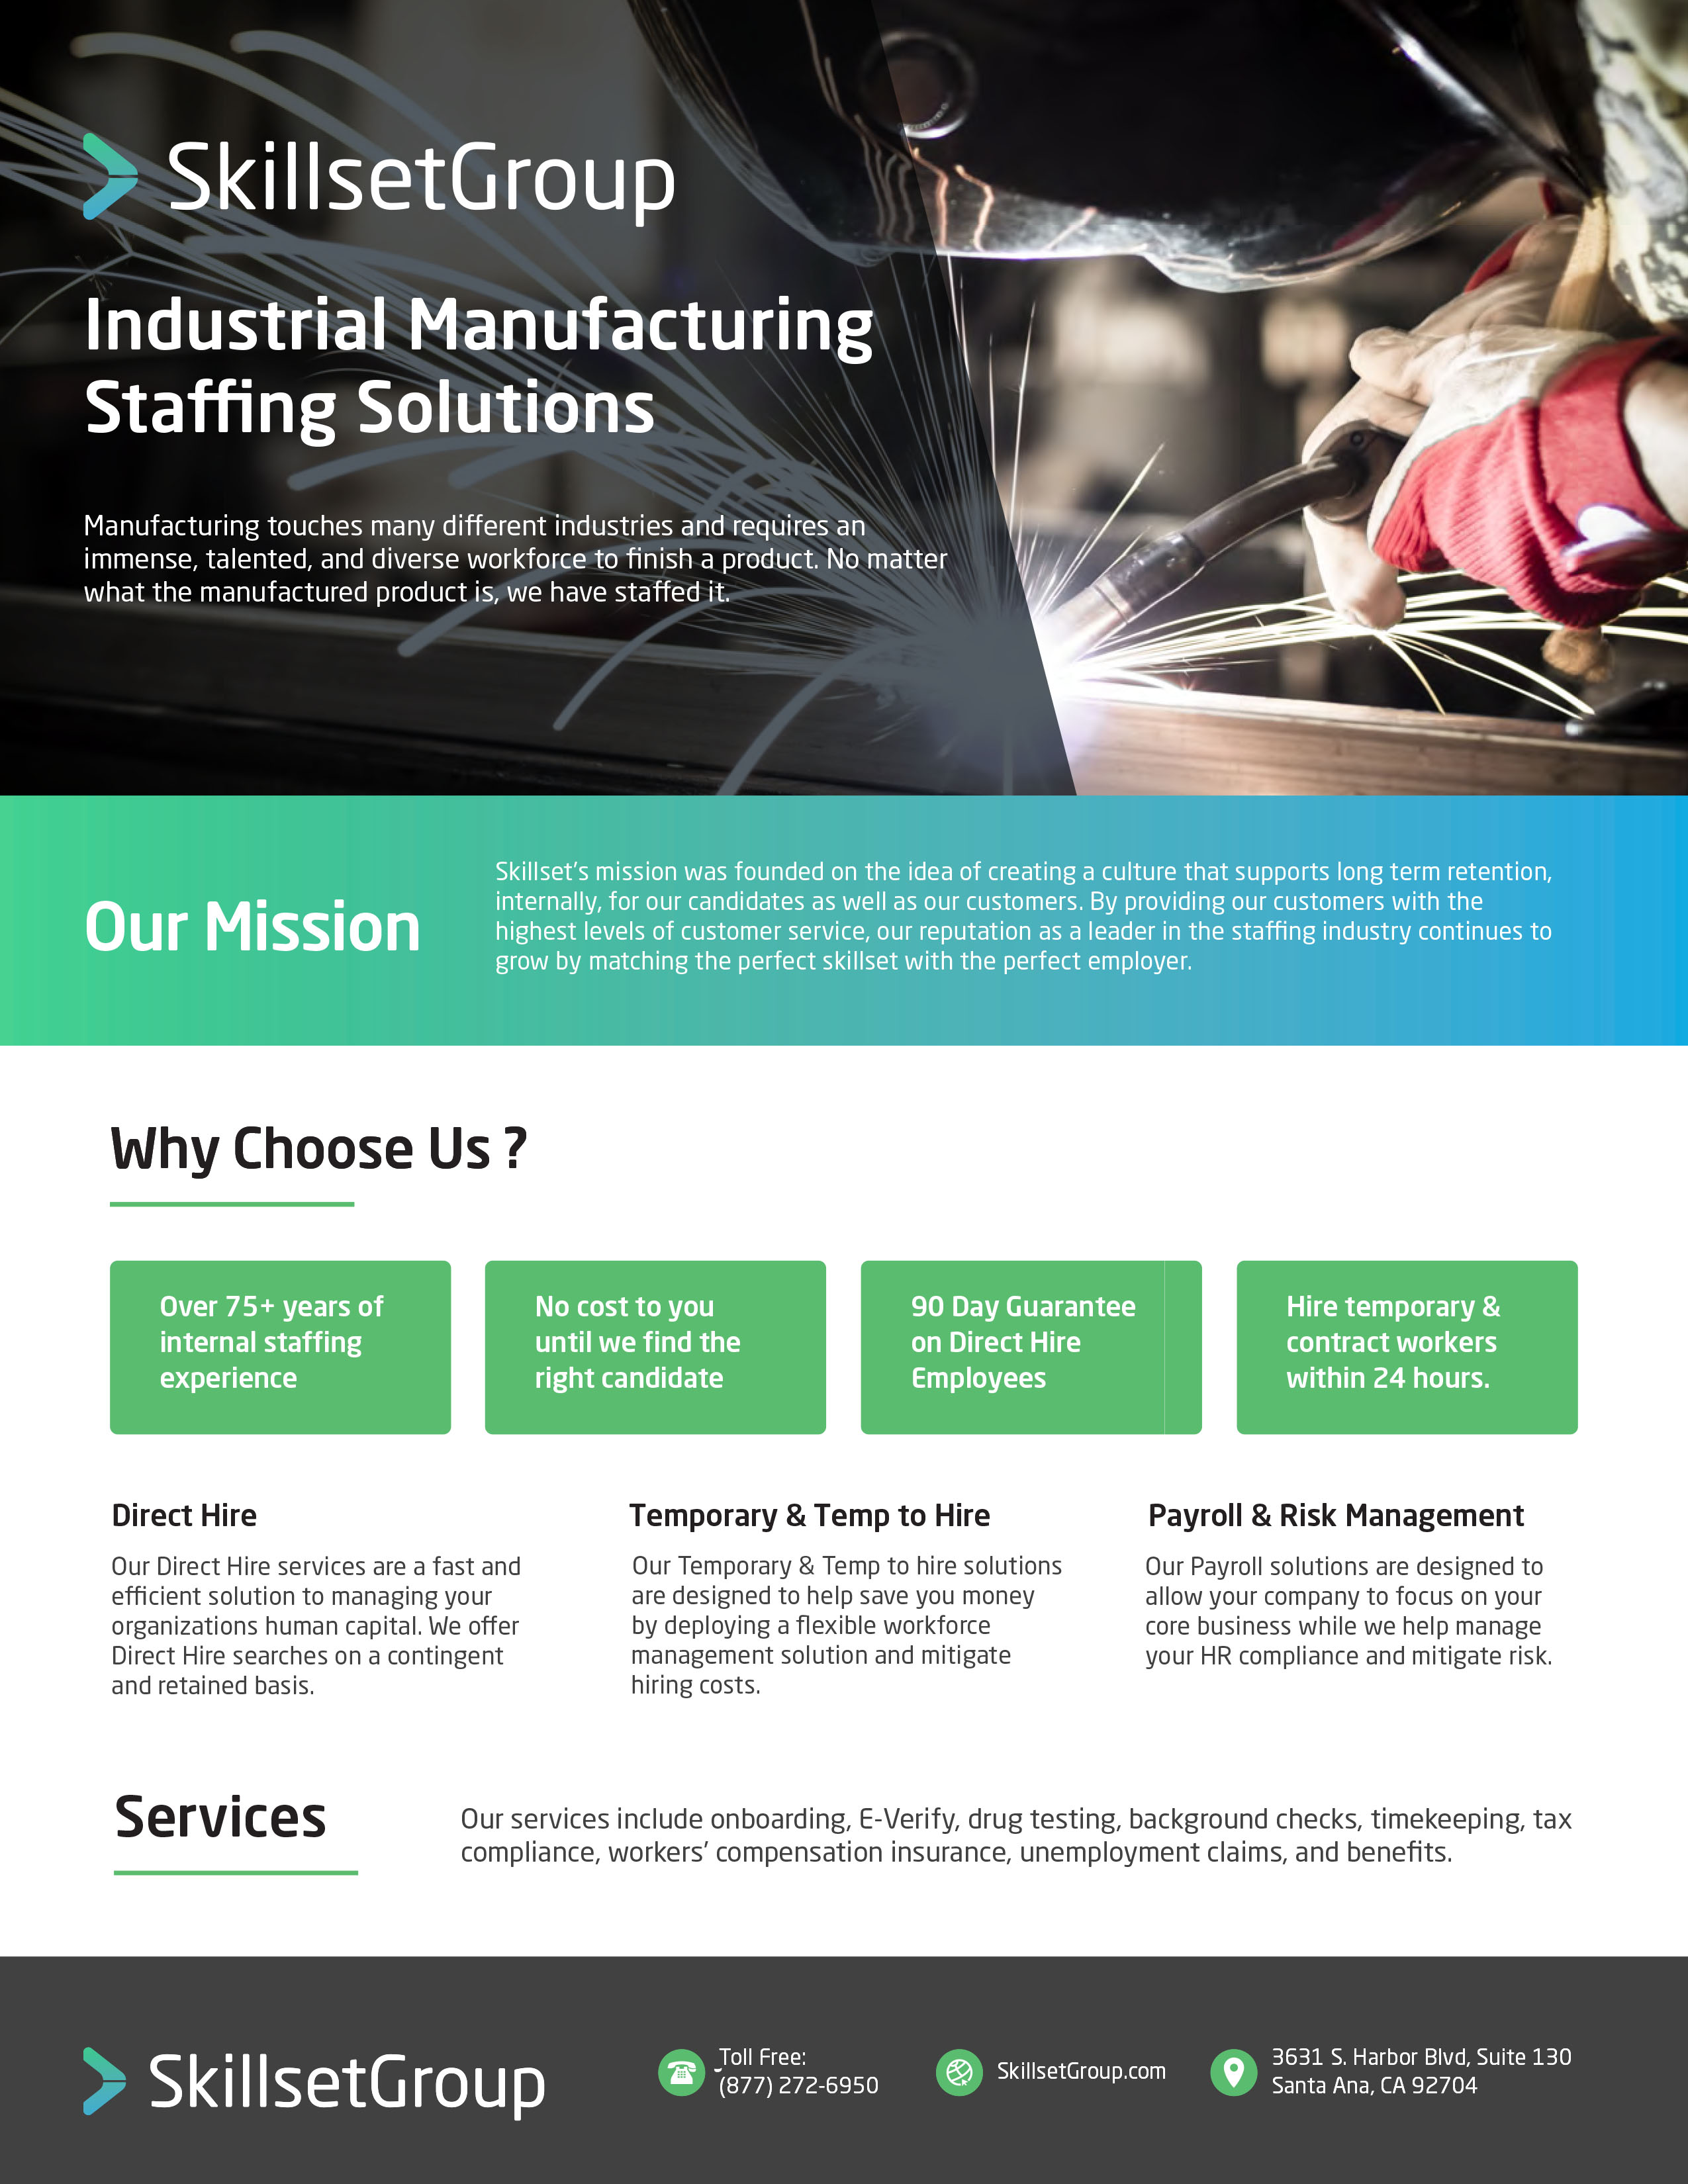 Industrial manufacturing staffing solutions from SkillsetGroup